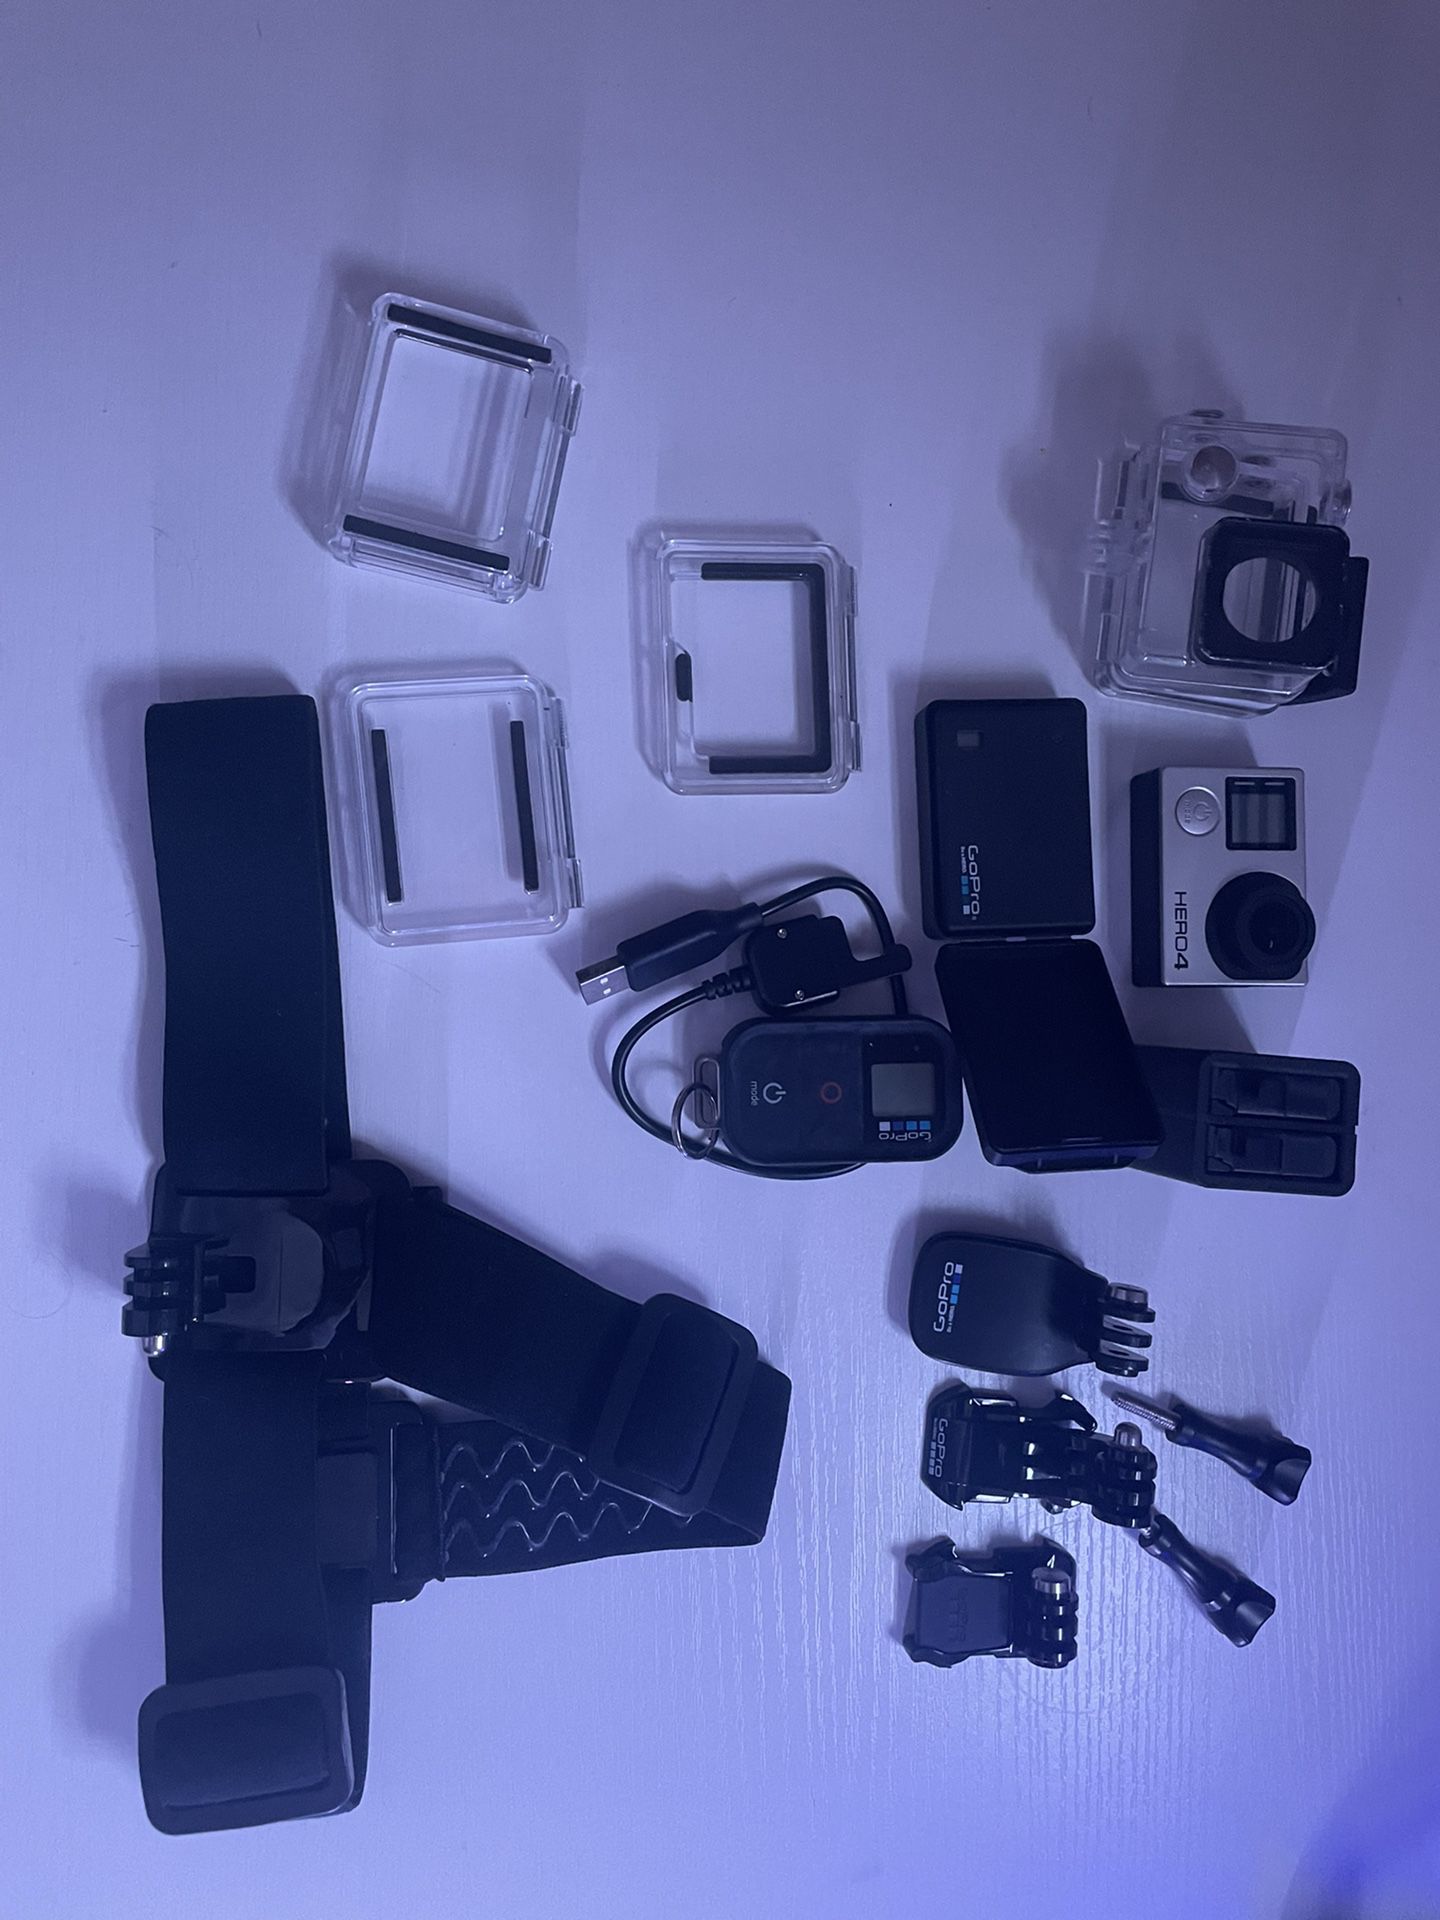 GoPro HERO4 Silver Camera + battery extender + remote control